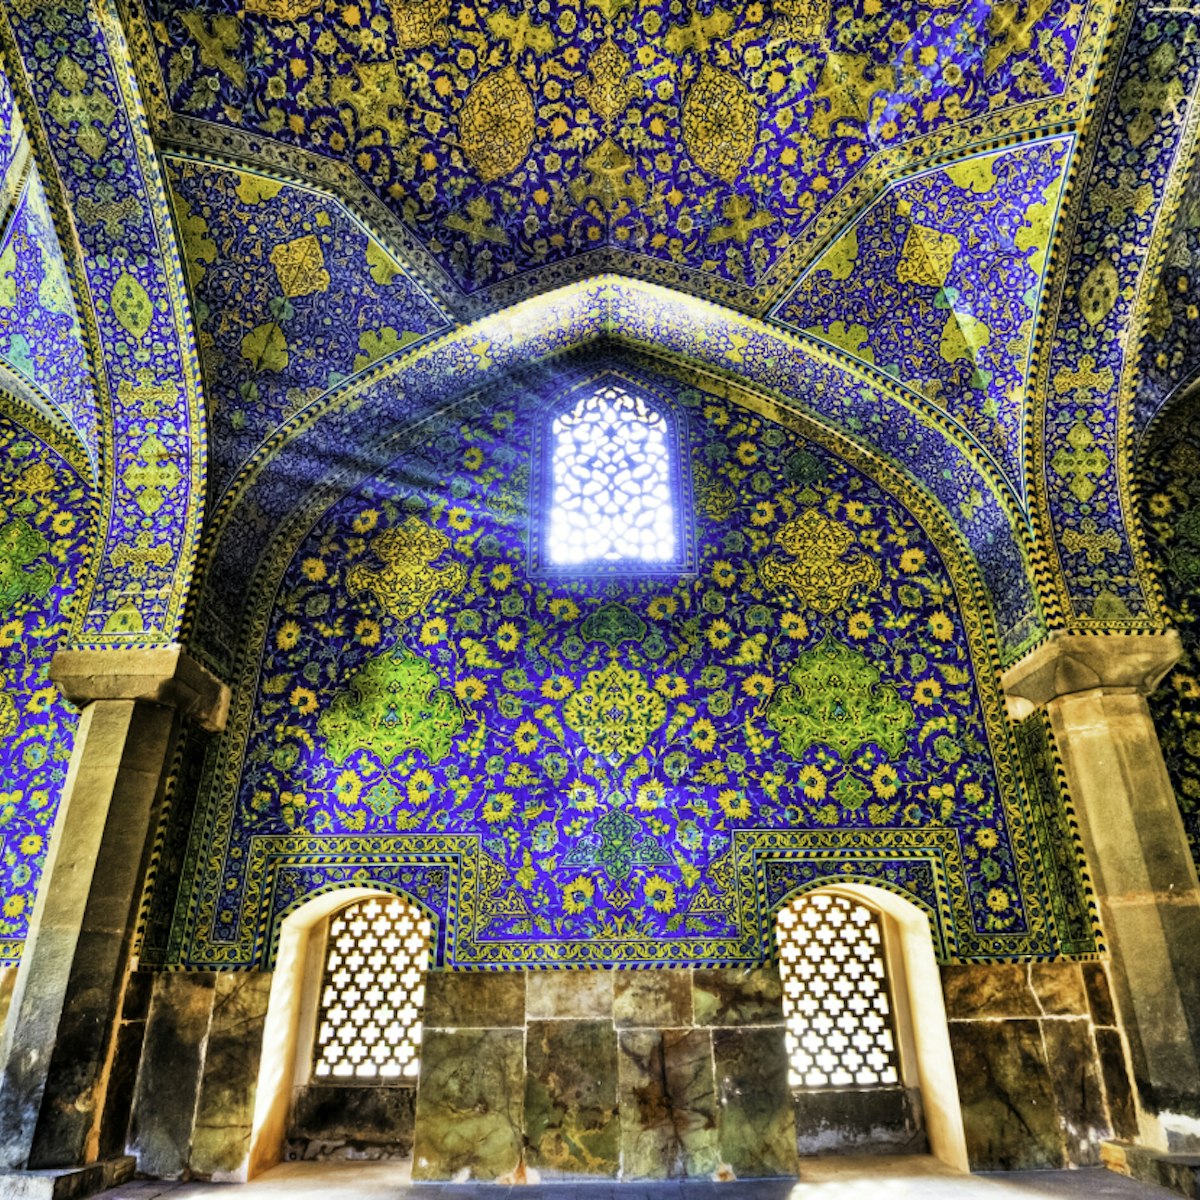 Imam Mosque at Naqhsh-e Jahan Square in Isfahan, Iran. Imam mosque is known as Shah Mosque. Its construction finished in 1629.; Shutterstock ID 92388088; Your name (First / Last): Lauren Keith; GL account no.: 65050; Netsuite department name: Online Editorial; Full Product or Project name including edition: Middle East Online Highlights Update
ancient, arch, architecture, art, building, culture, dark, decoration, design, dome, east, esfahan, heritage, historic, holy, imam, inner, inside, interior, iran, iranian, isfahan, islam, islamic, jahan, light, masjid, mosque, muslim, naqsh-e, old, ornament, pattern, persia, persian, pray, religion, sacred, shah, shine, sight, site, square, structure, sunlight, sunny, tile, traditional, vintage, wall